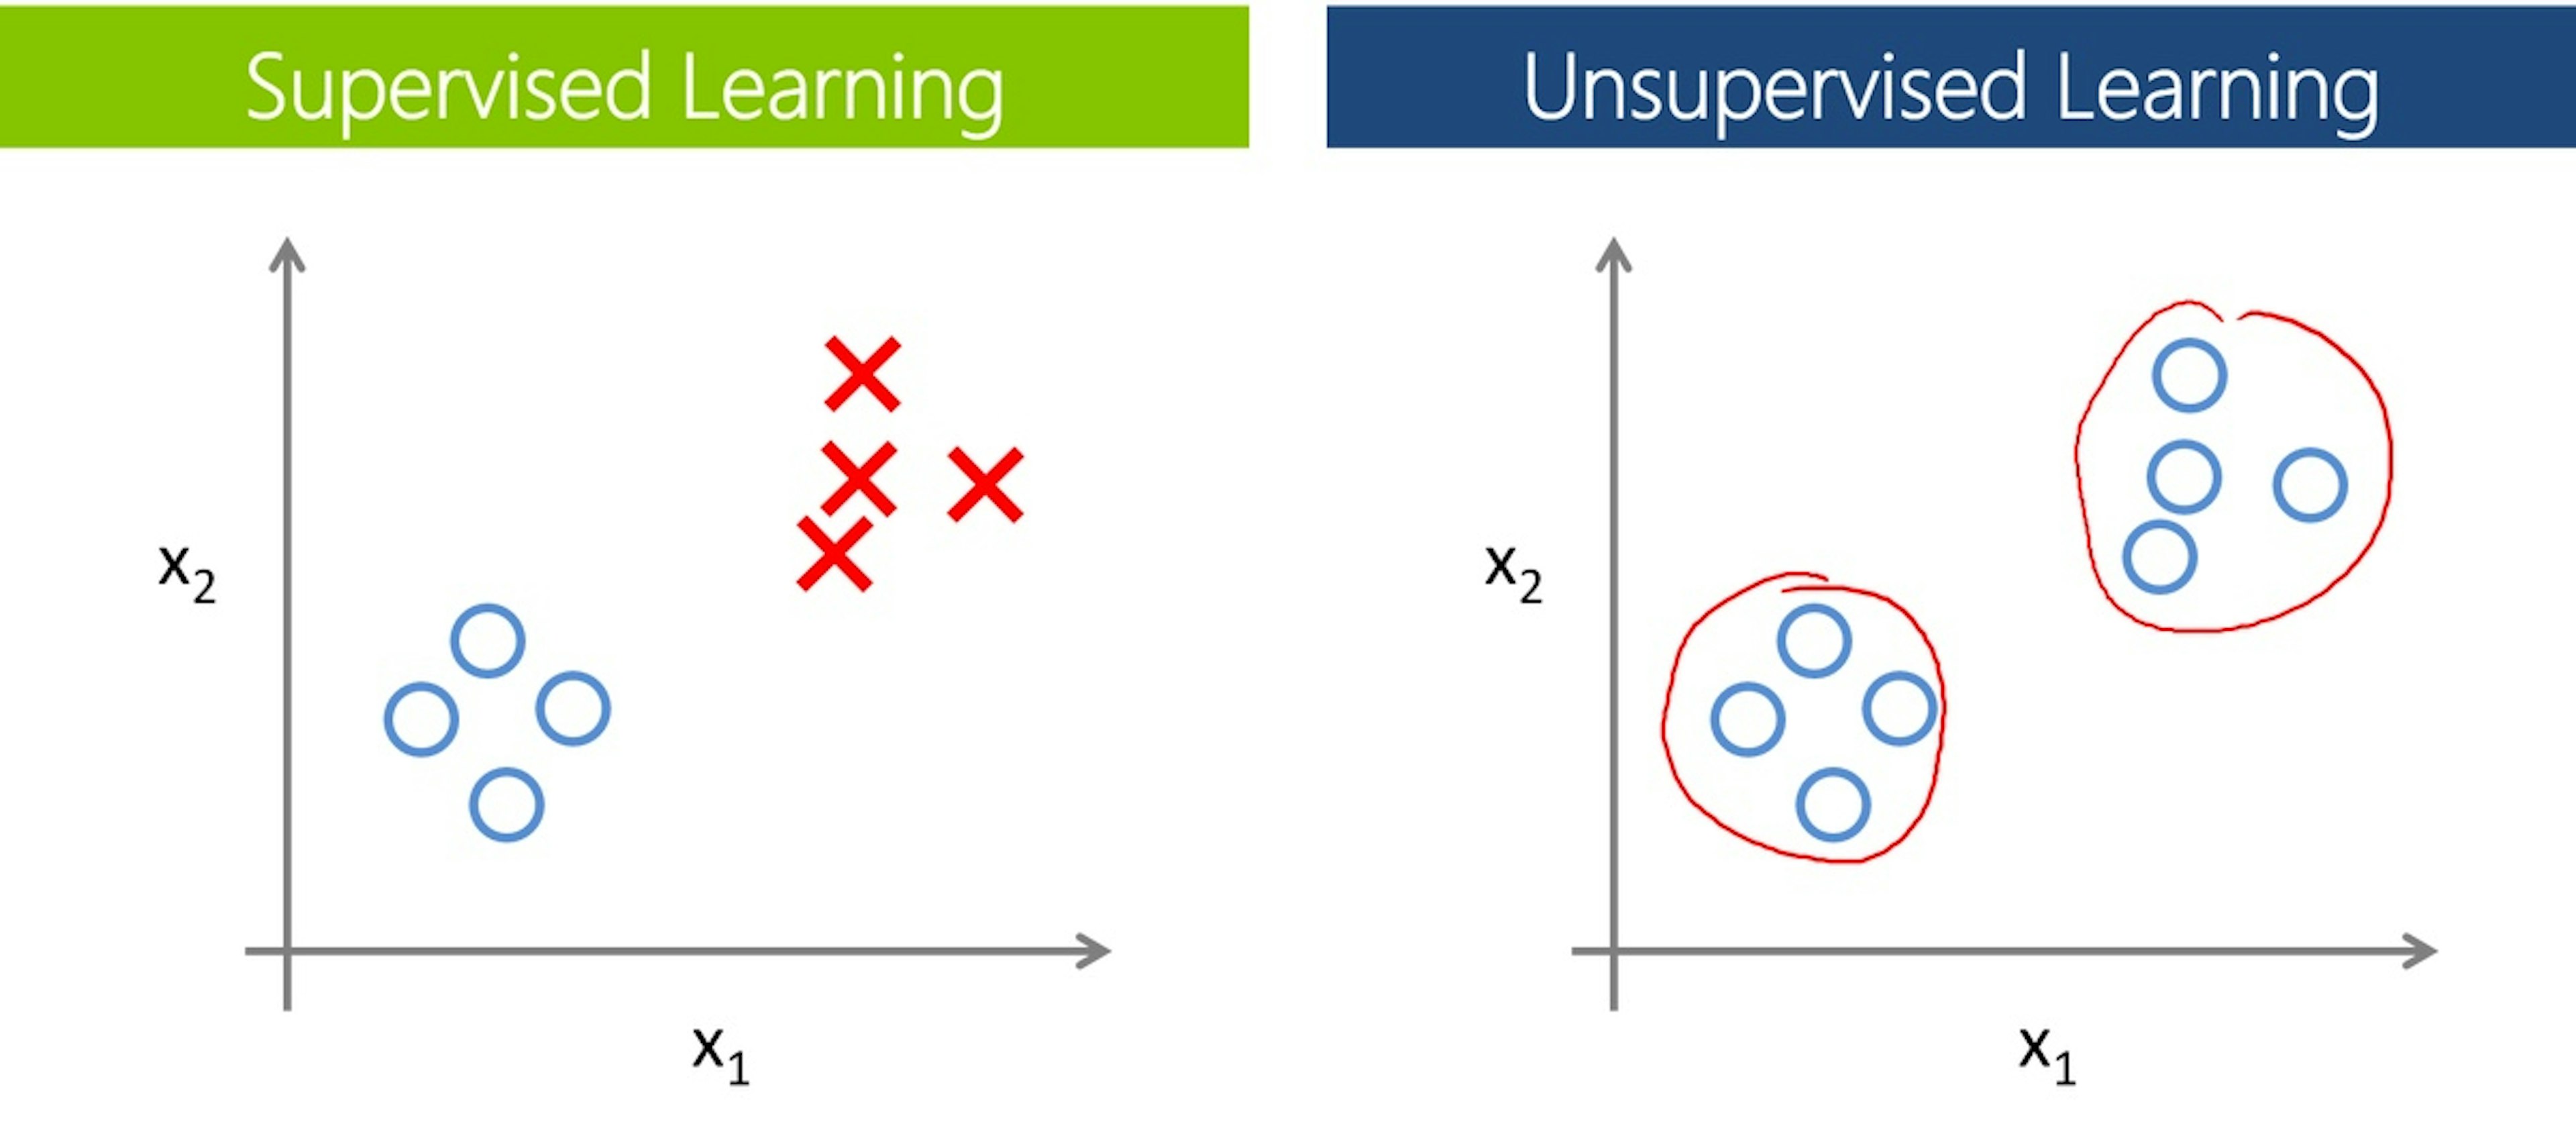 Illustration comparing supervised and unsupervised learning.